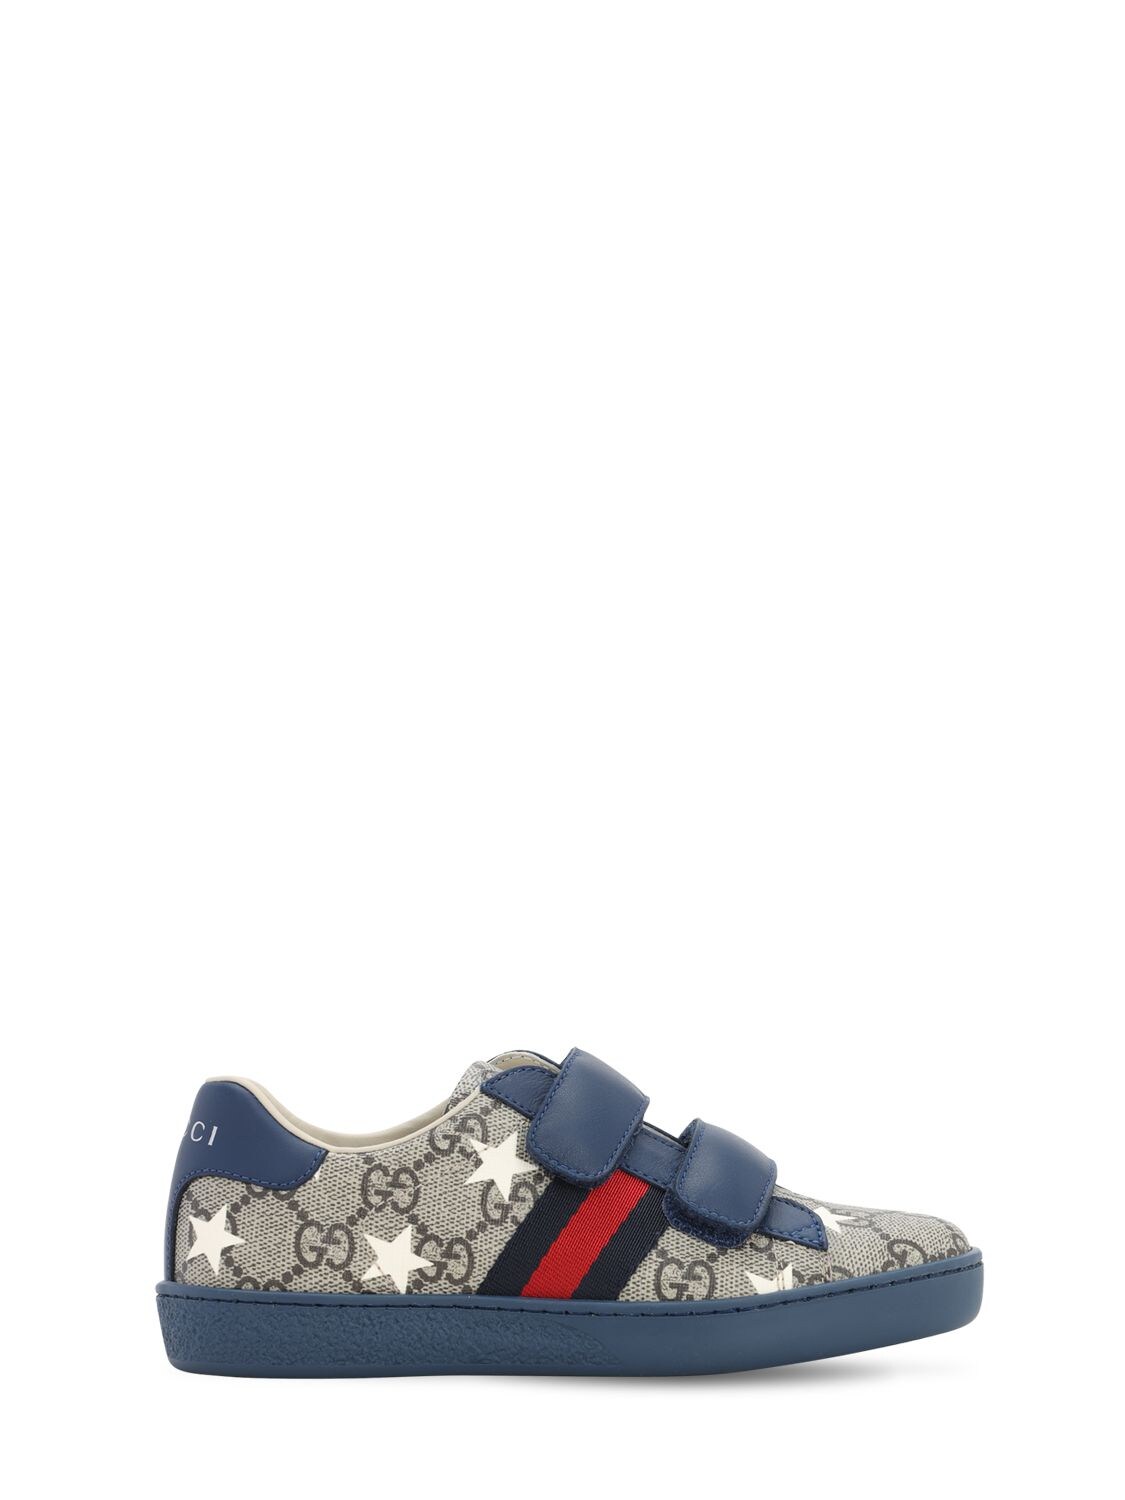 Gucci Kids' Star Print Canvas & Leather Sneakers In Beige,navy